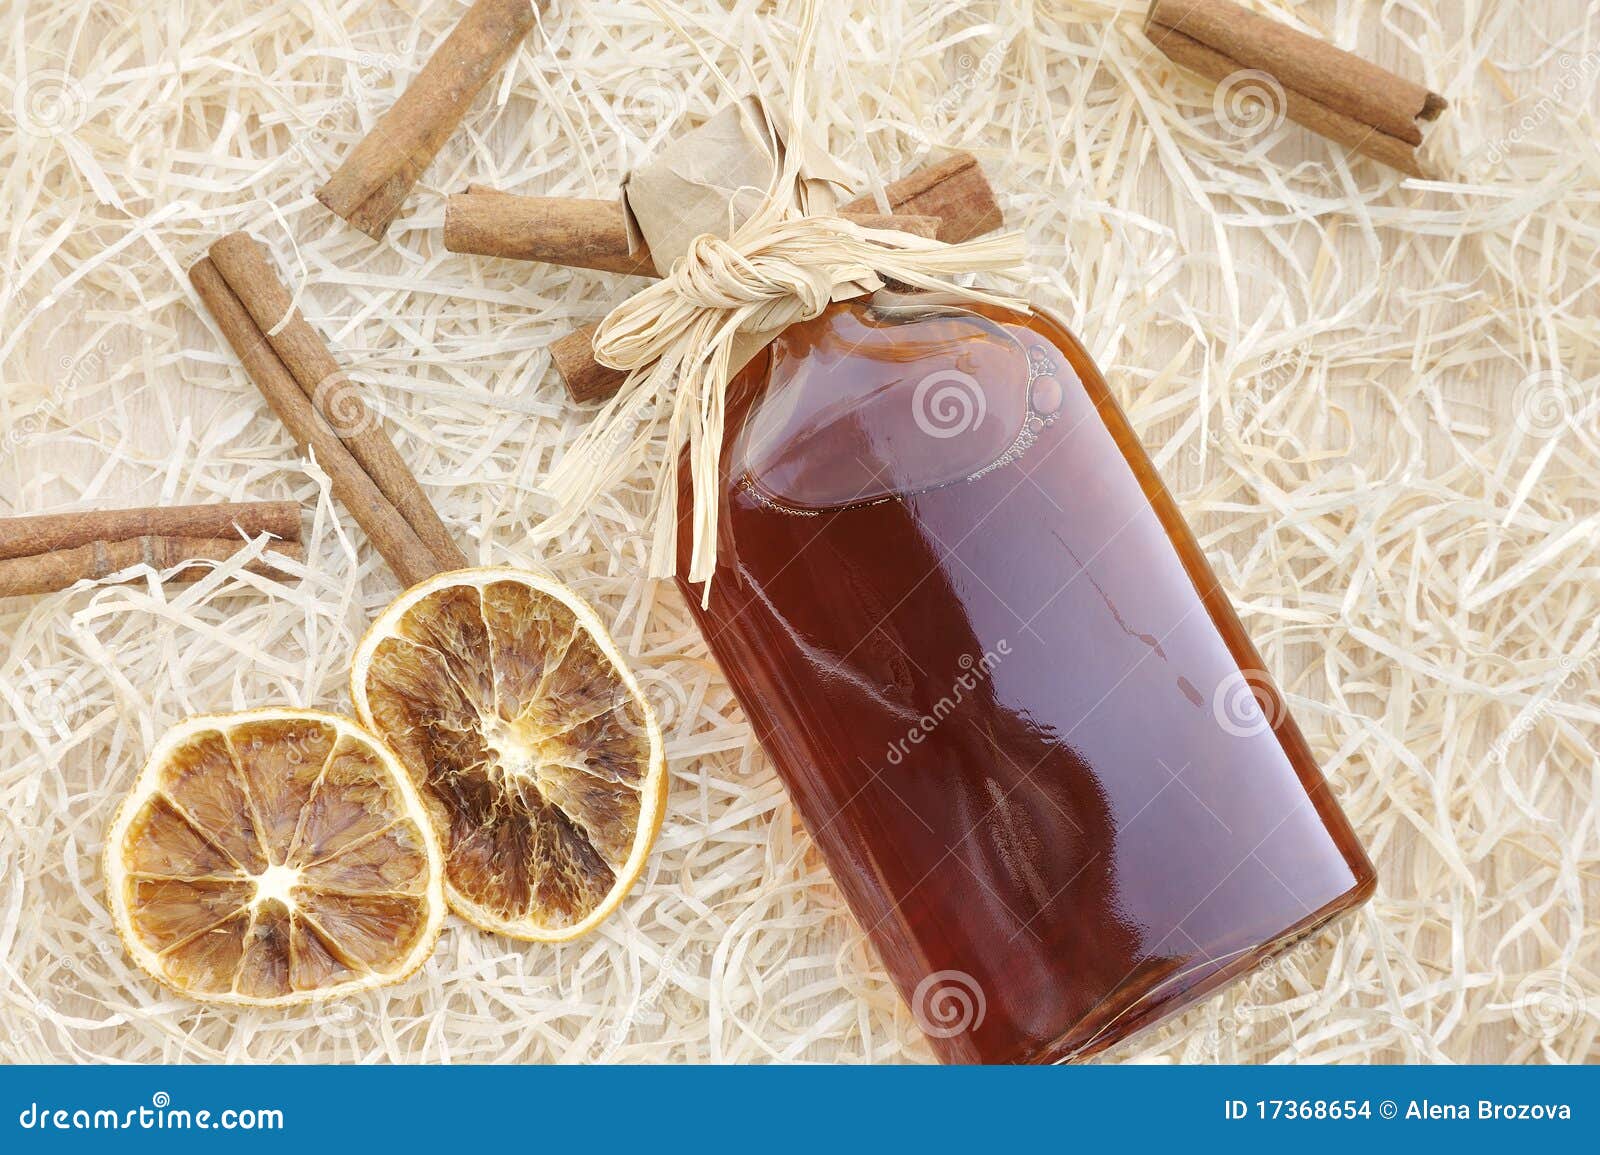 homemade liqueur with spices